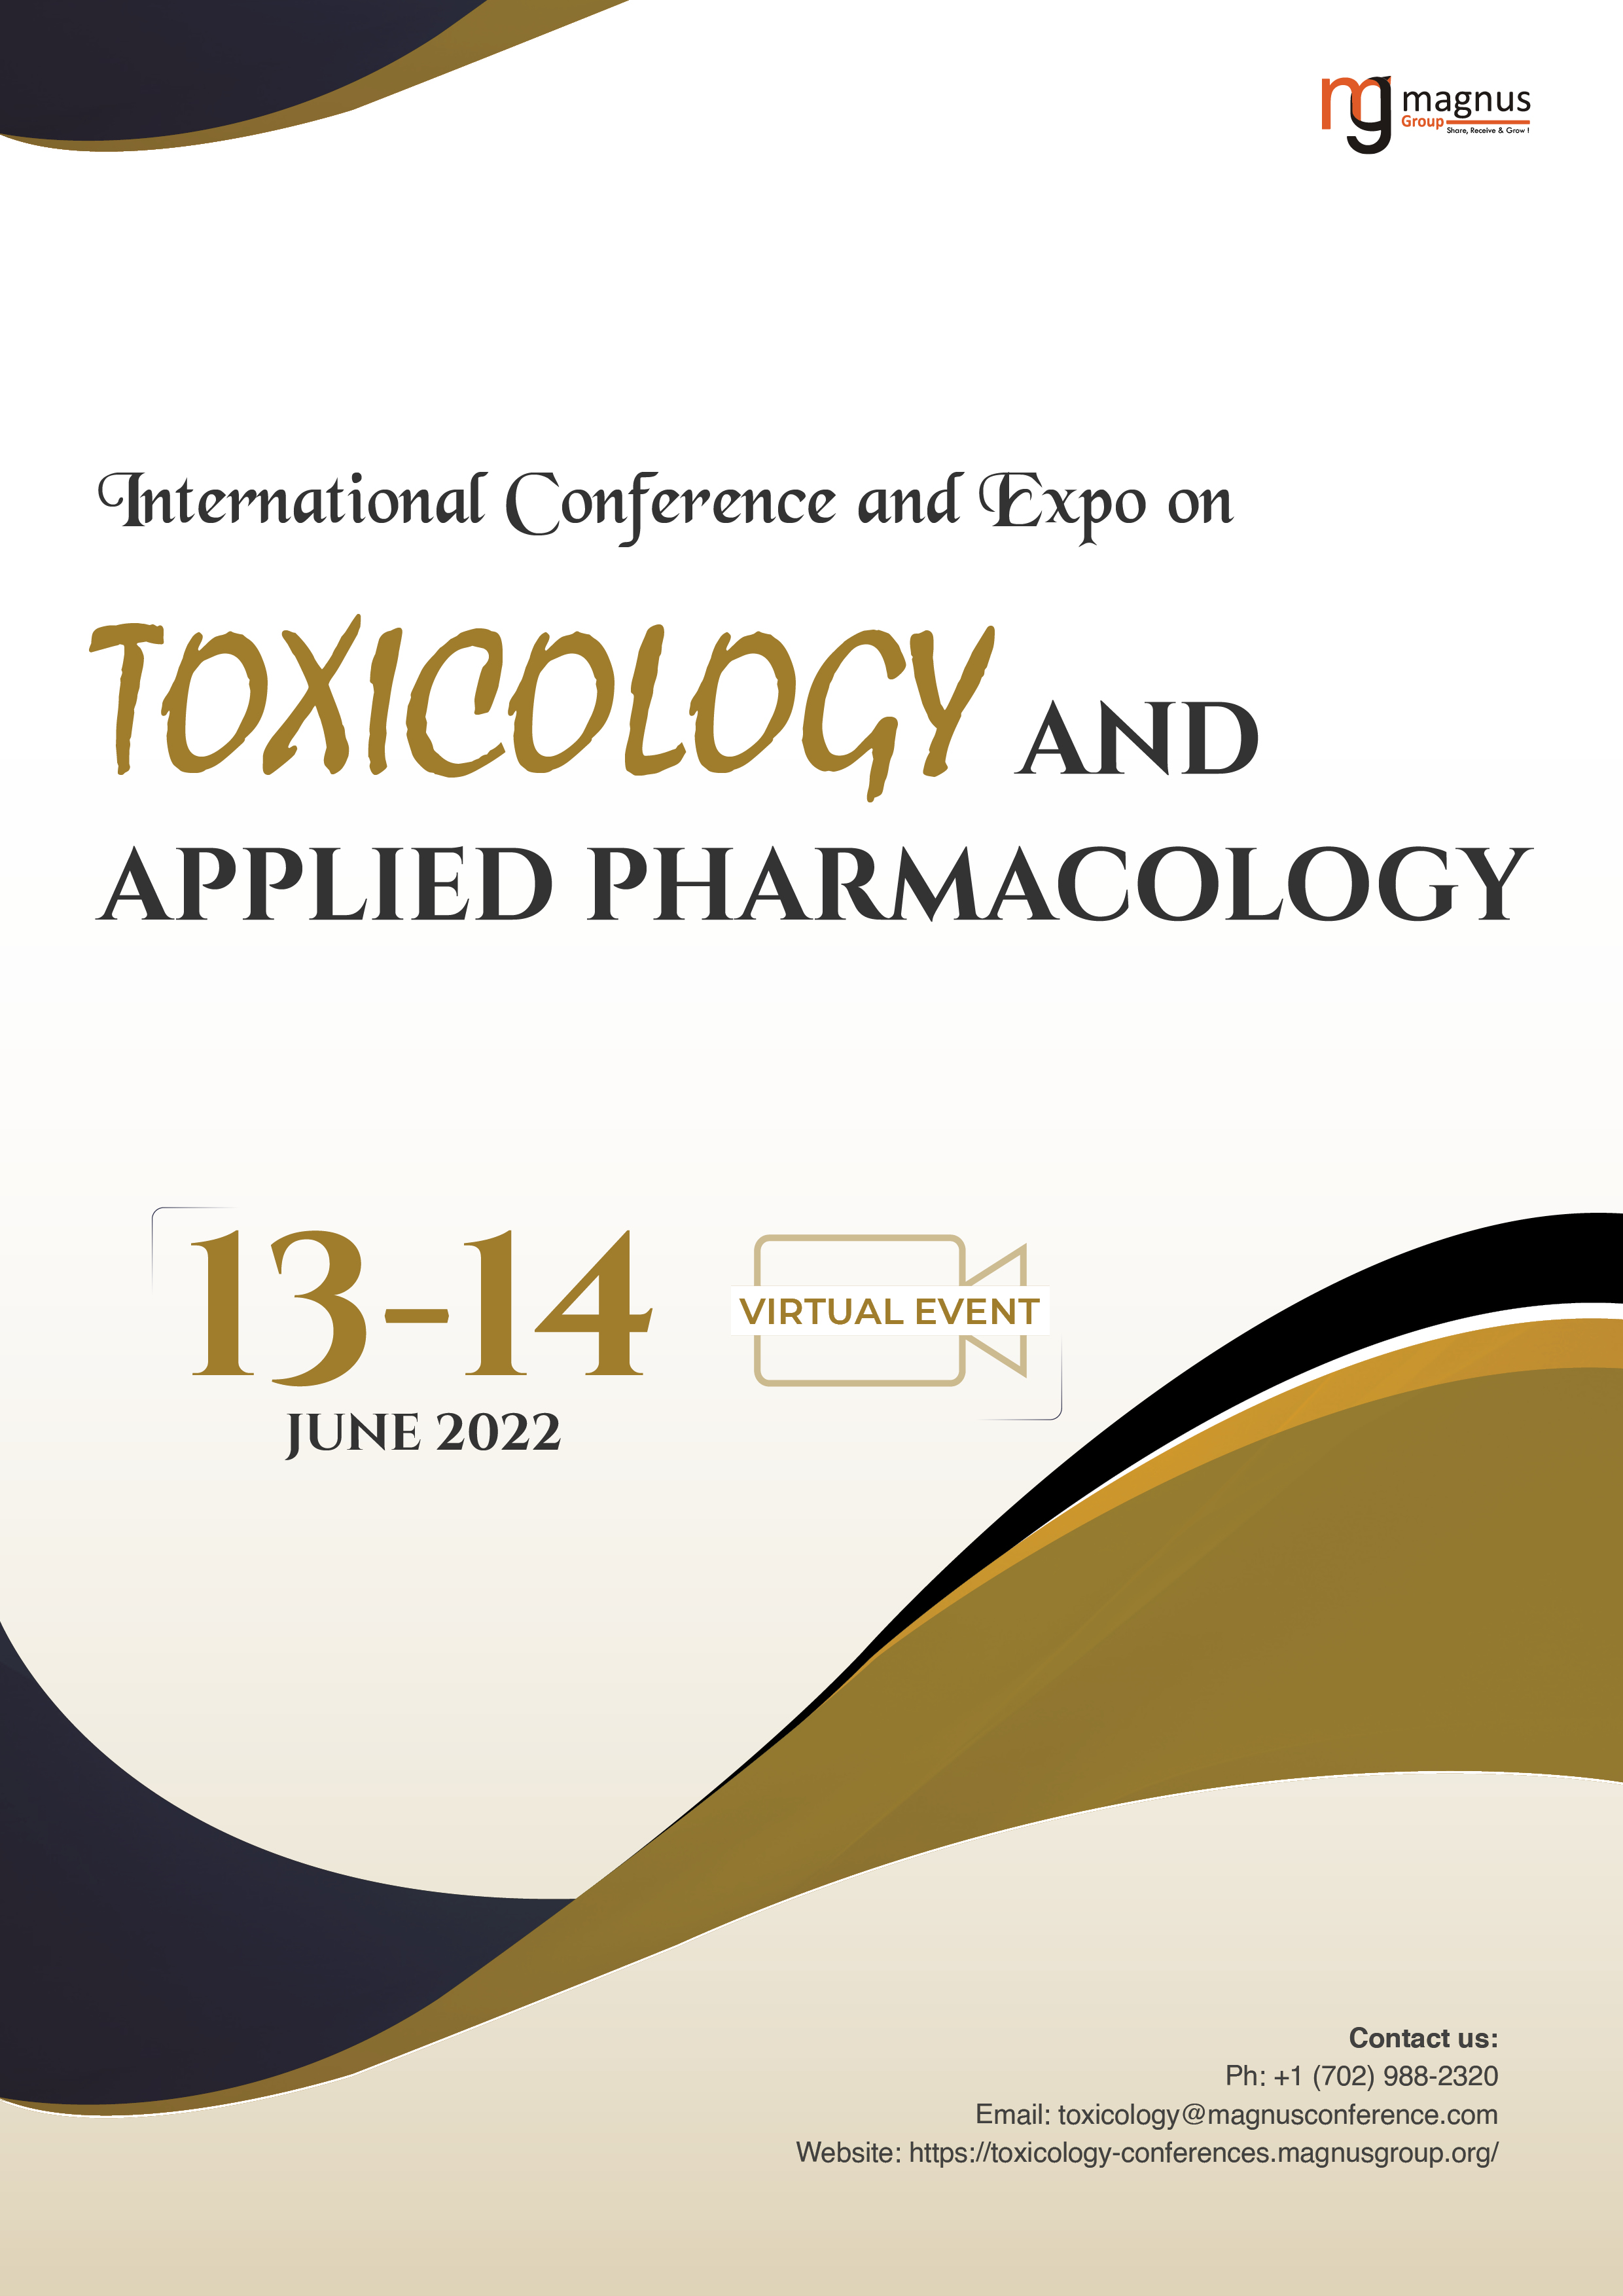 International Conference and Expo on Toxicology and Applied Pharmacology Conference  | Online Event Book